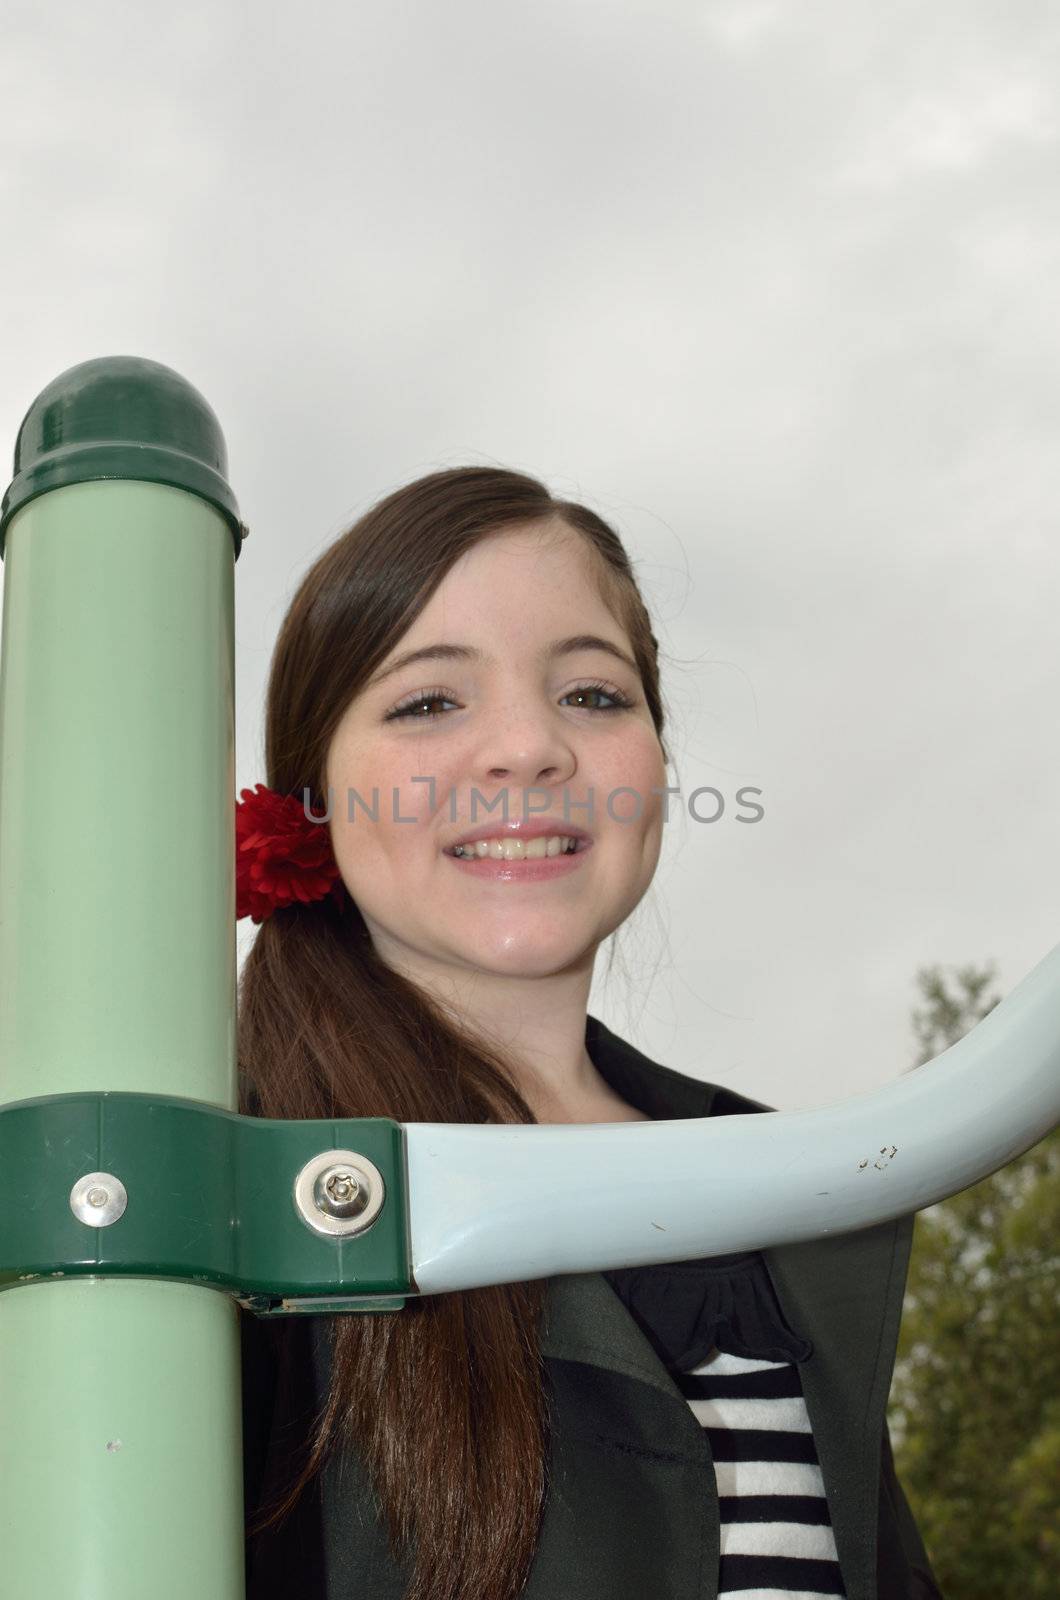 Young girl on the playground equipment